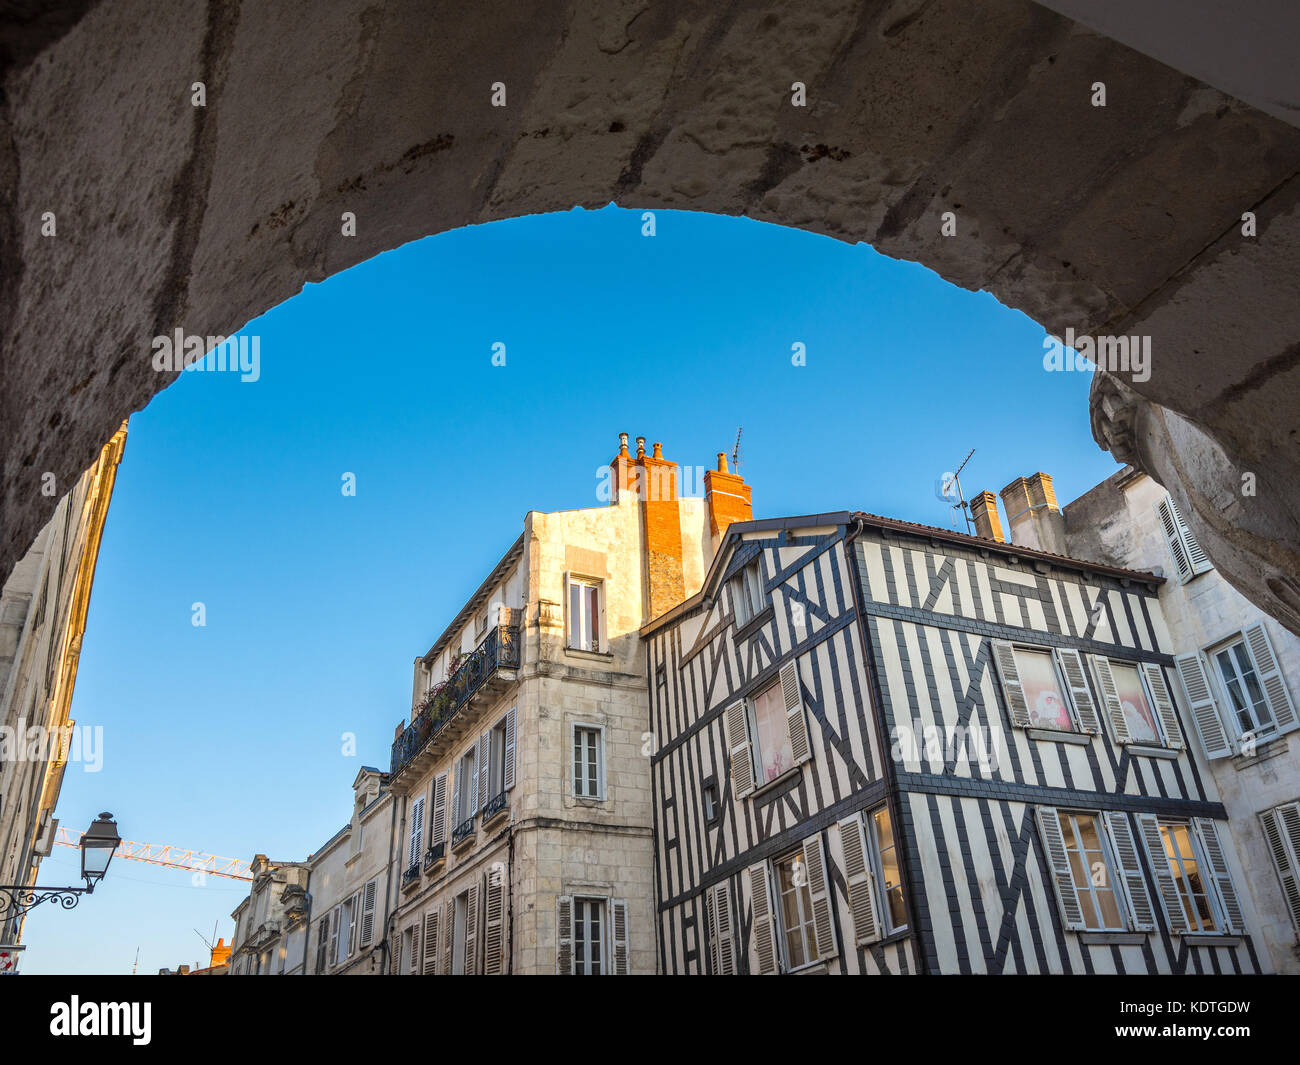 Detail of old buildings with slates protecting timbers from salty air, La Rochelle, France. Stock Photo